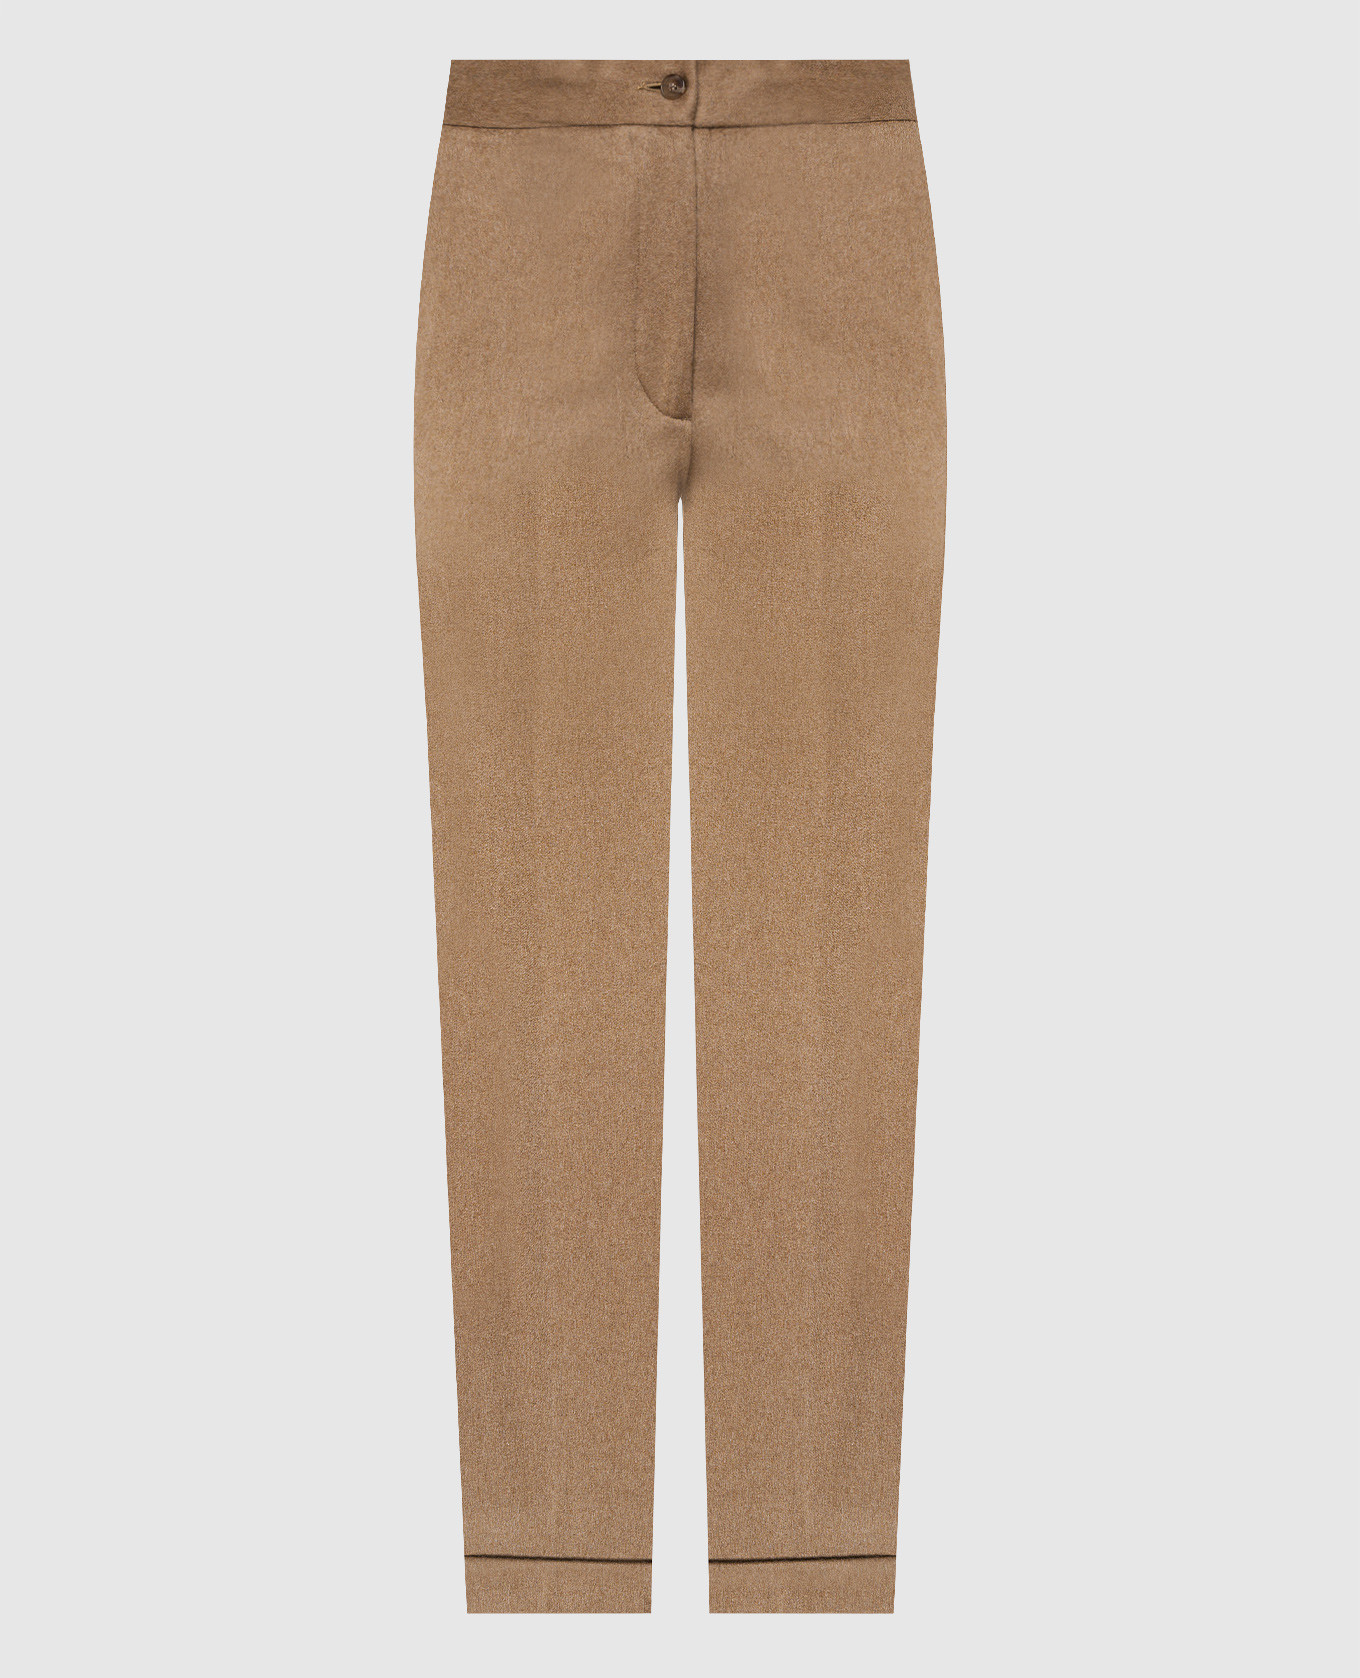 Brown cashmere trousers with lapels